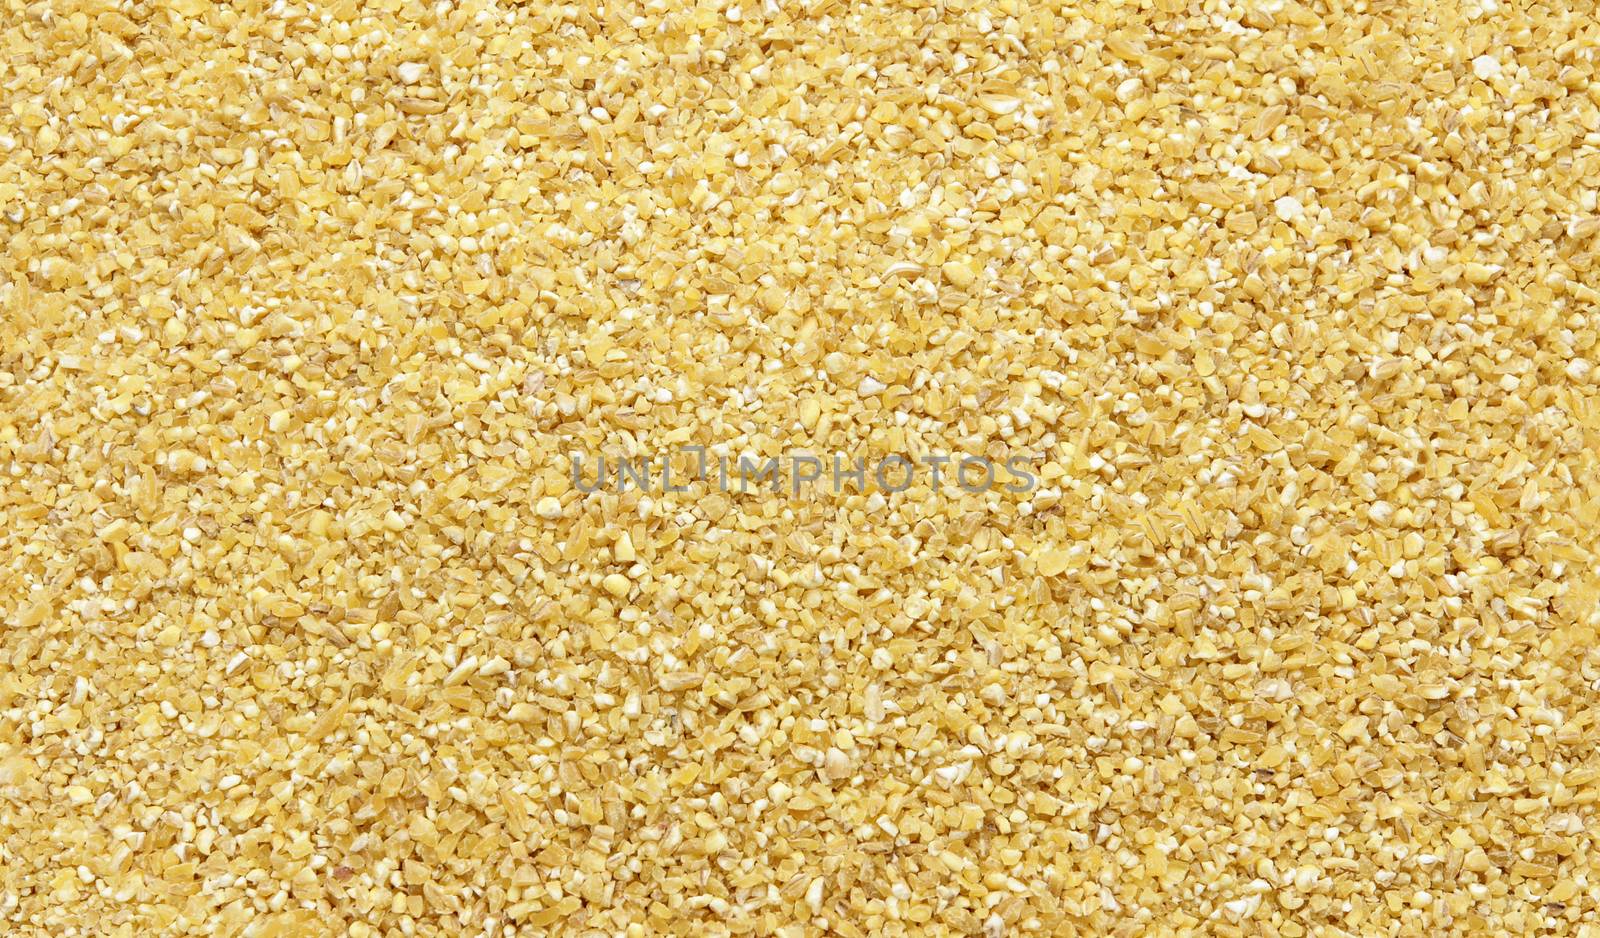 Fine ground durum wheat or groats -texture and details, closeup